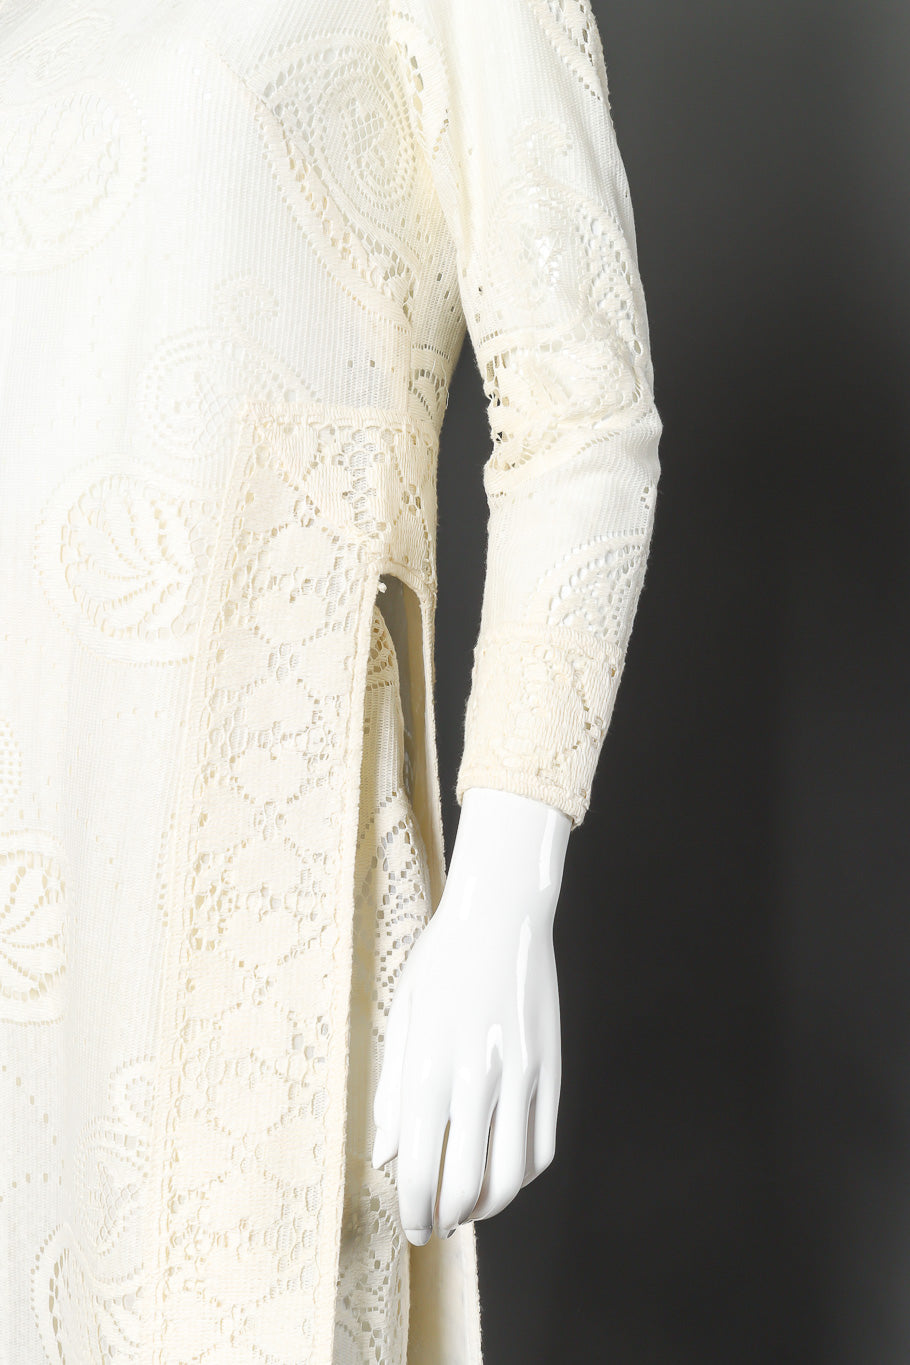 Rebecca for I. Magnin & Co. embroidered tunic and set sleeve detail @recessla